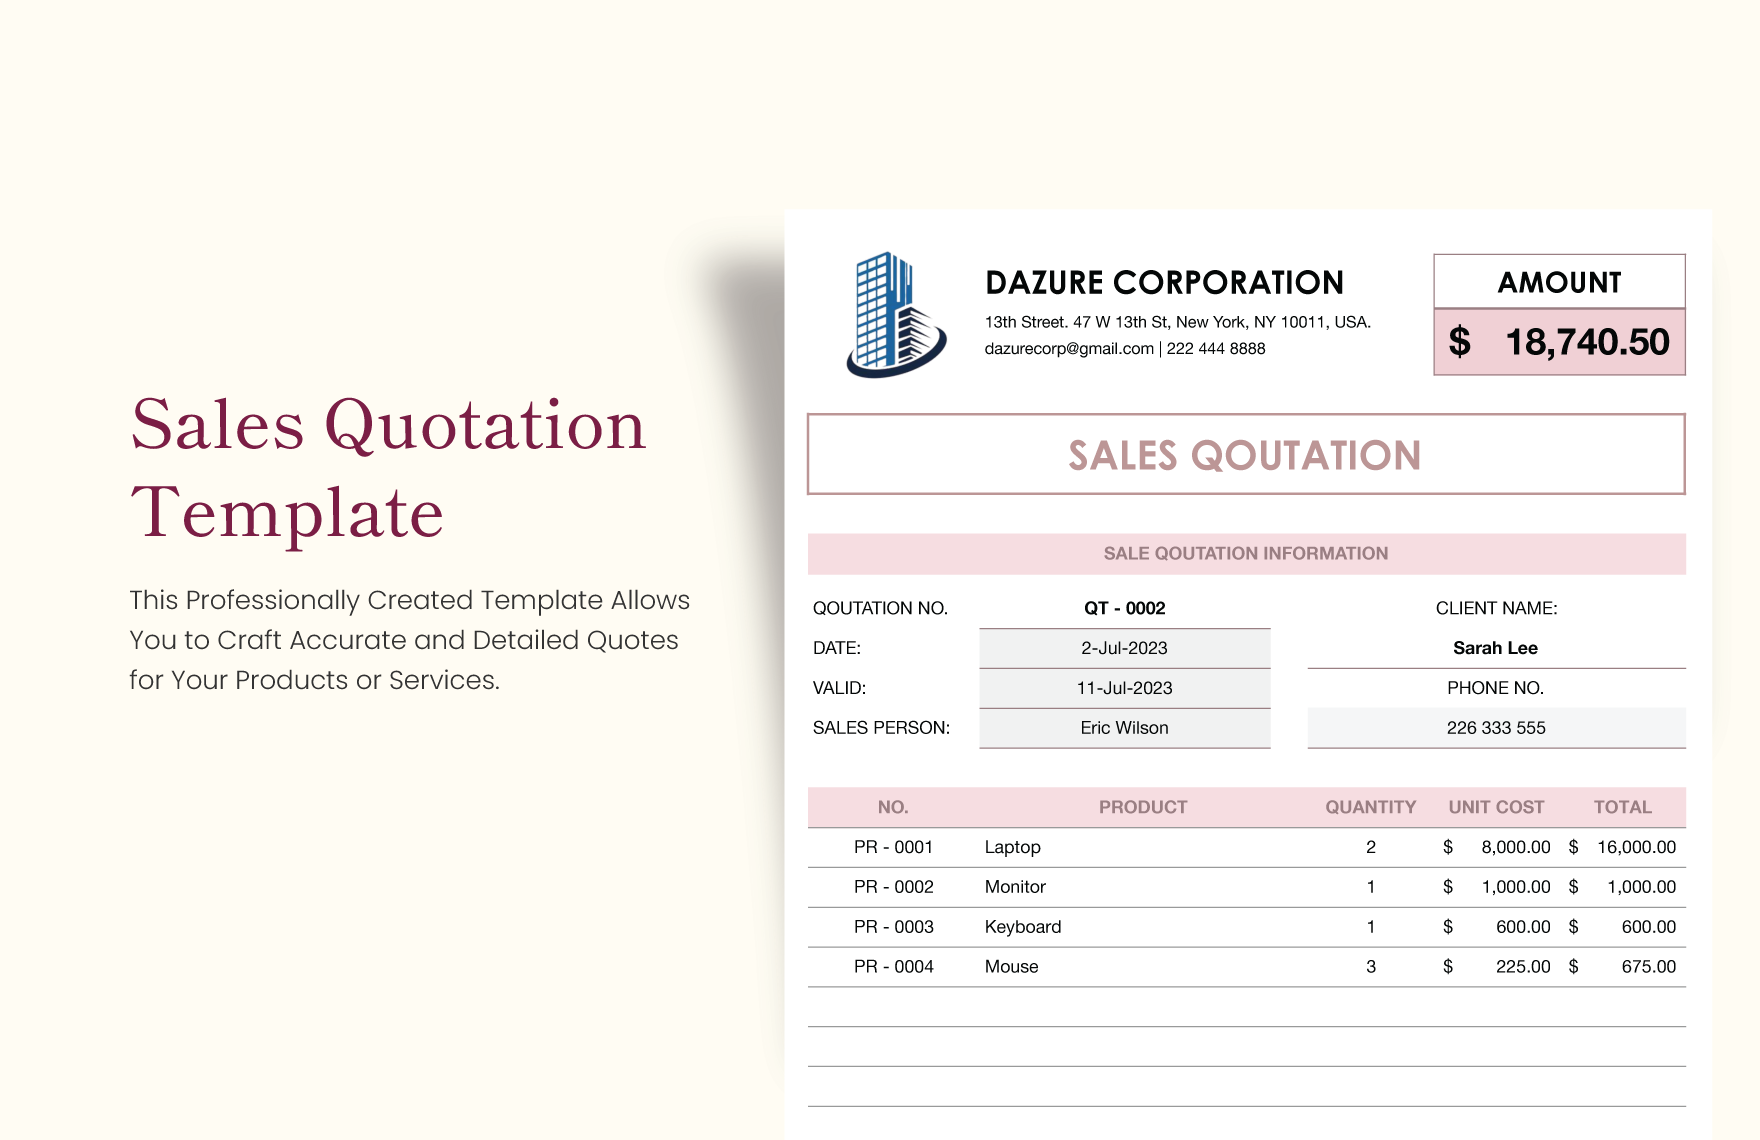 Sales Quotation Template in Excel, Google Sheets